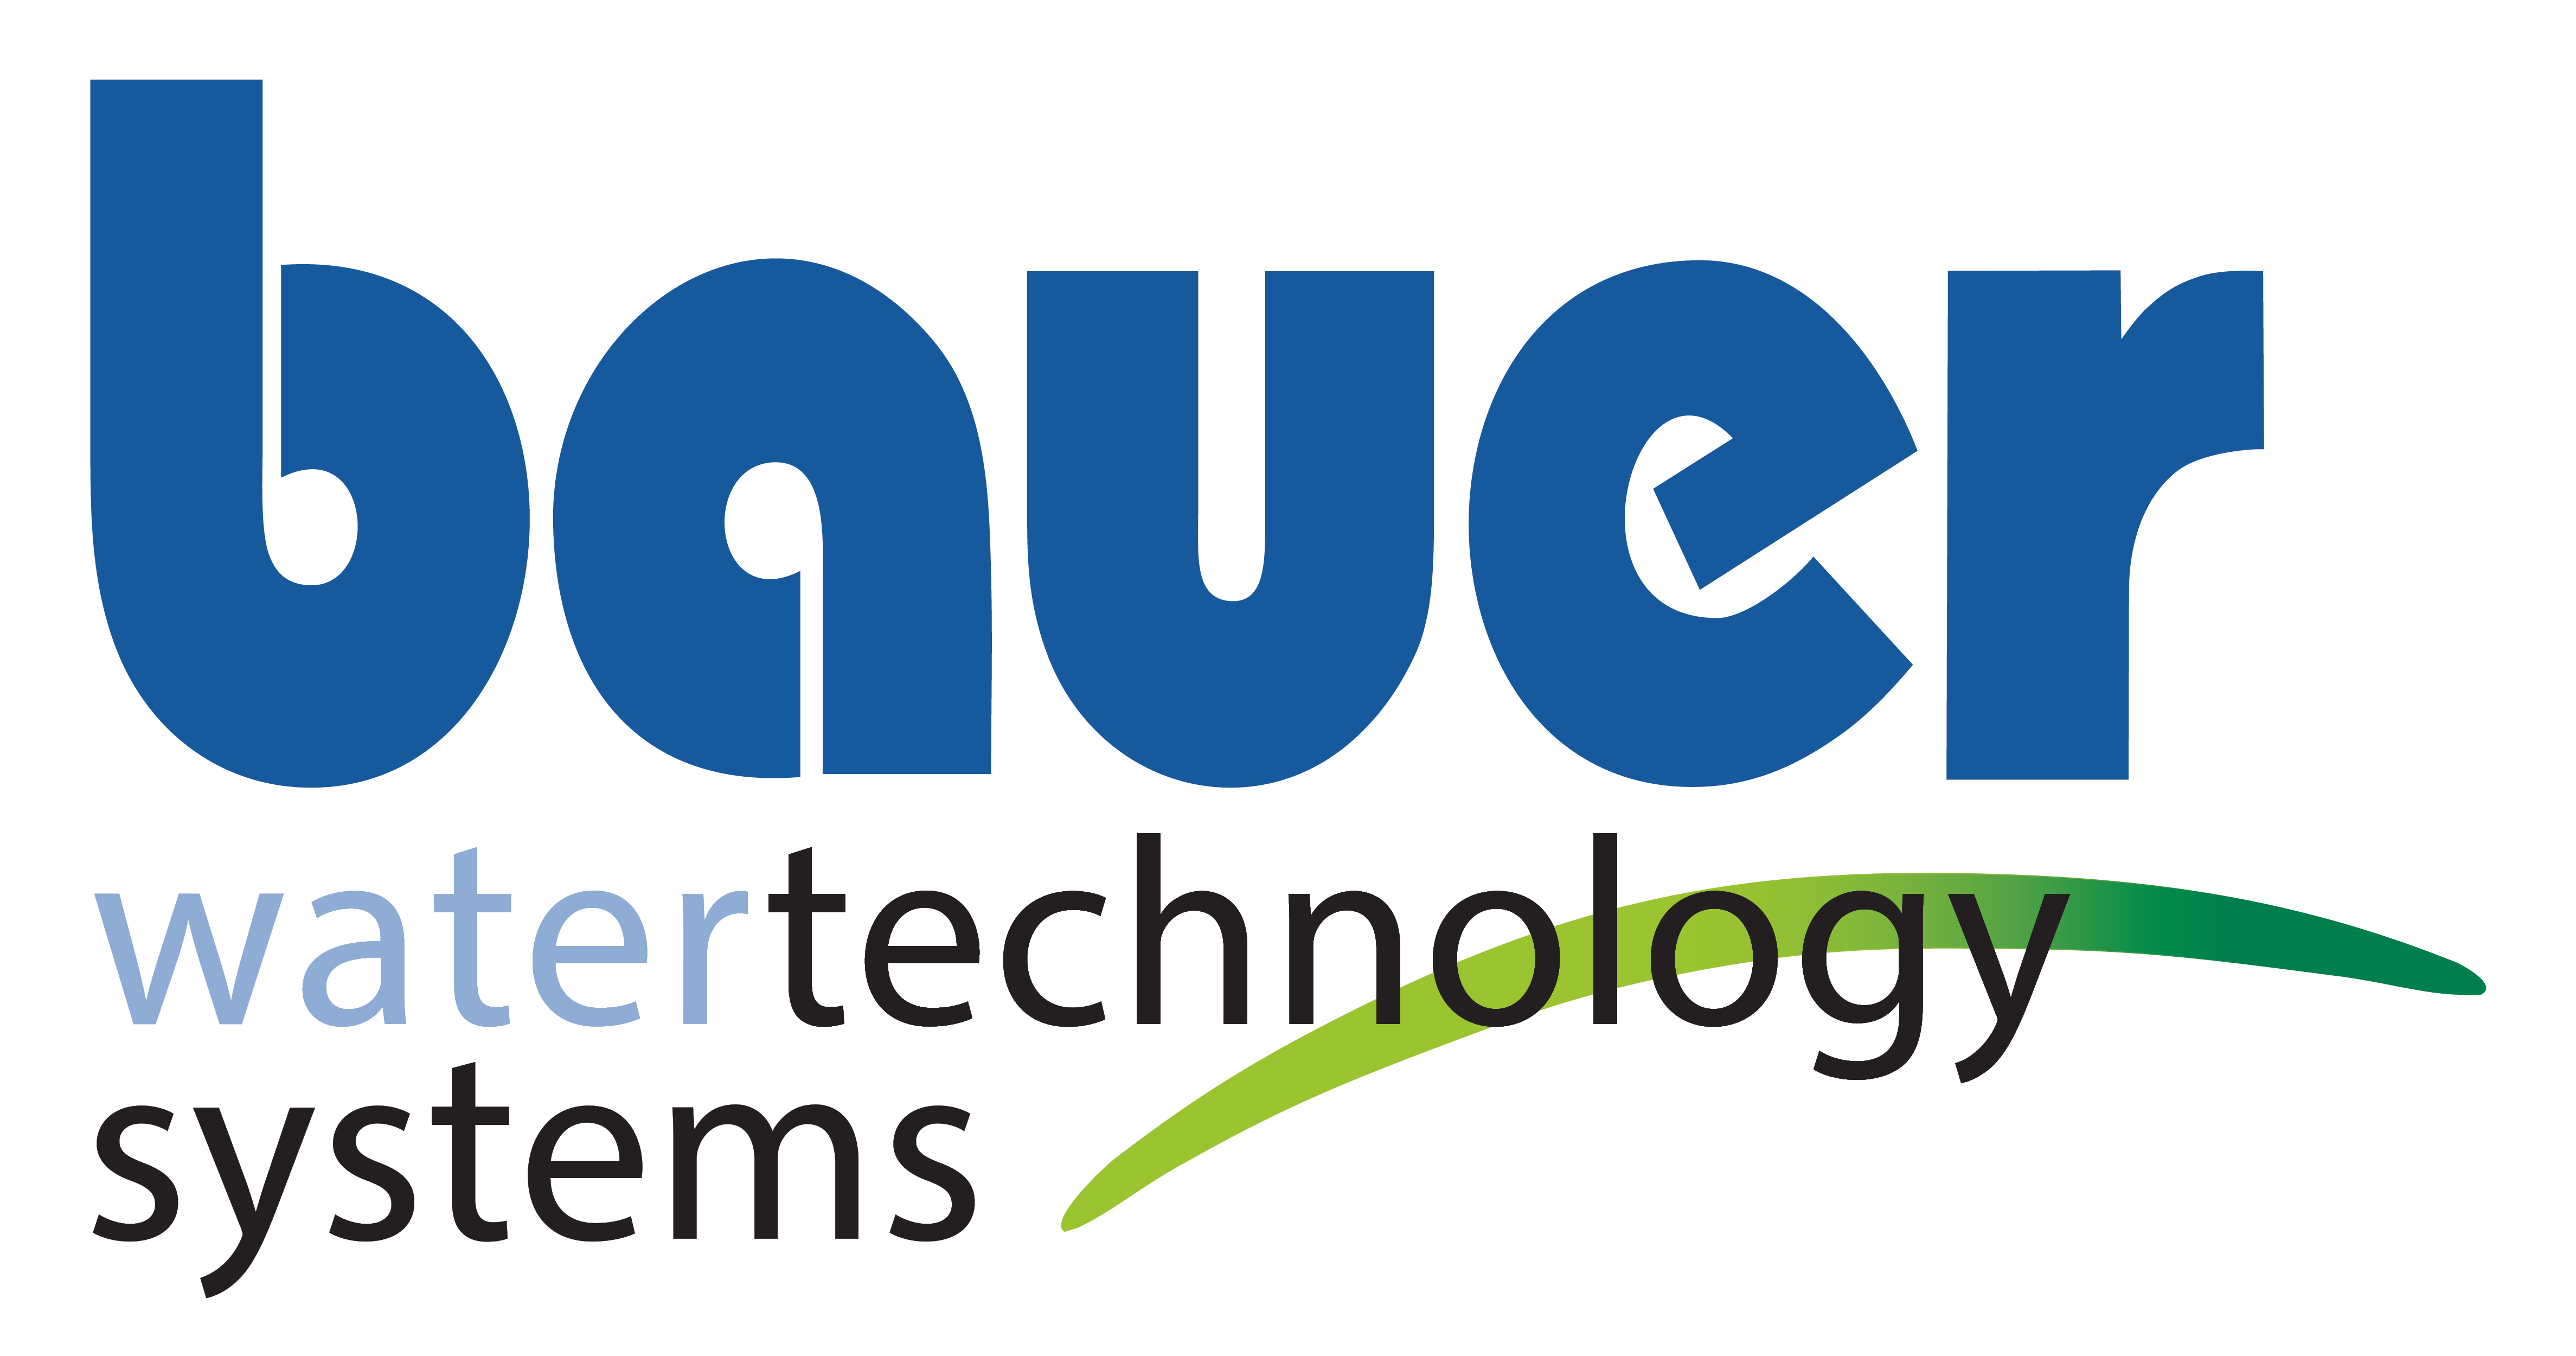 Bauer Watertechnology Systems AB